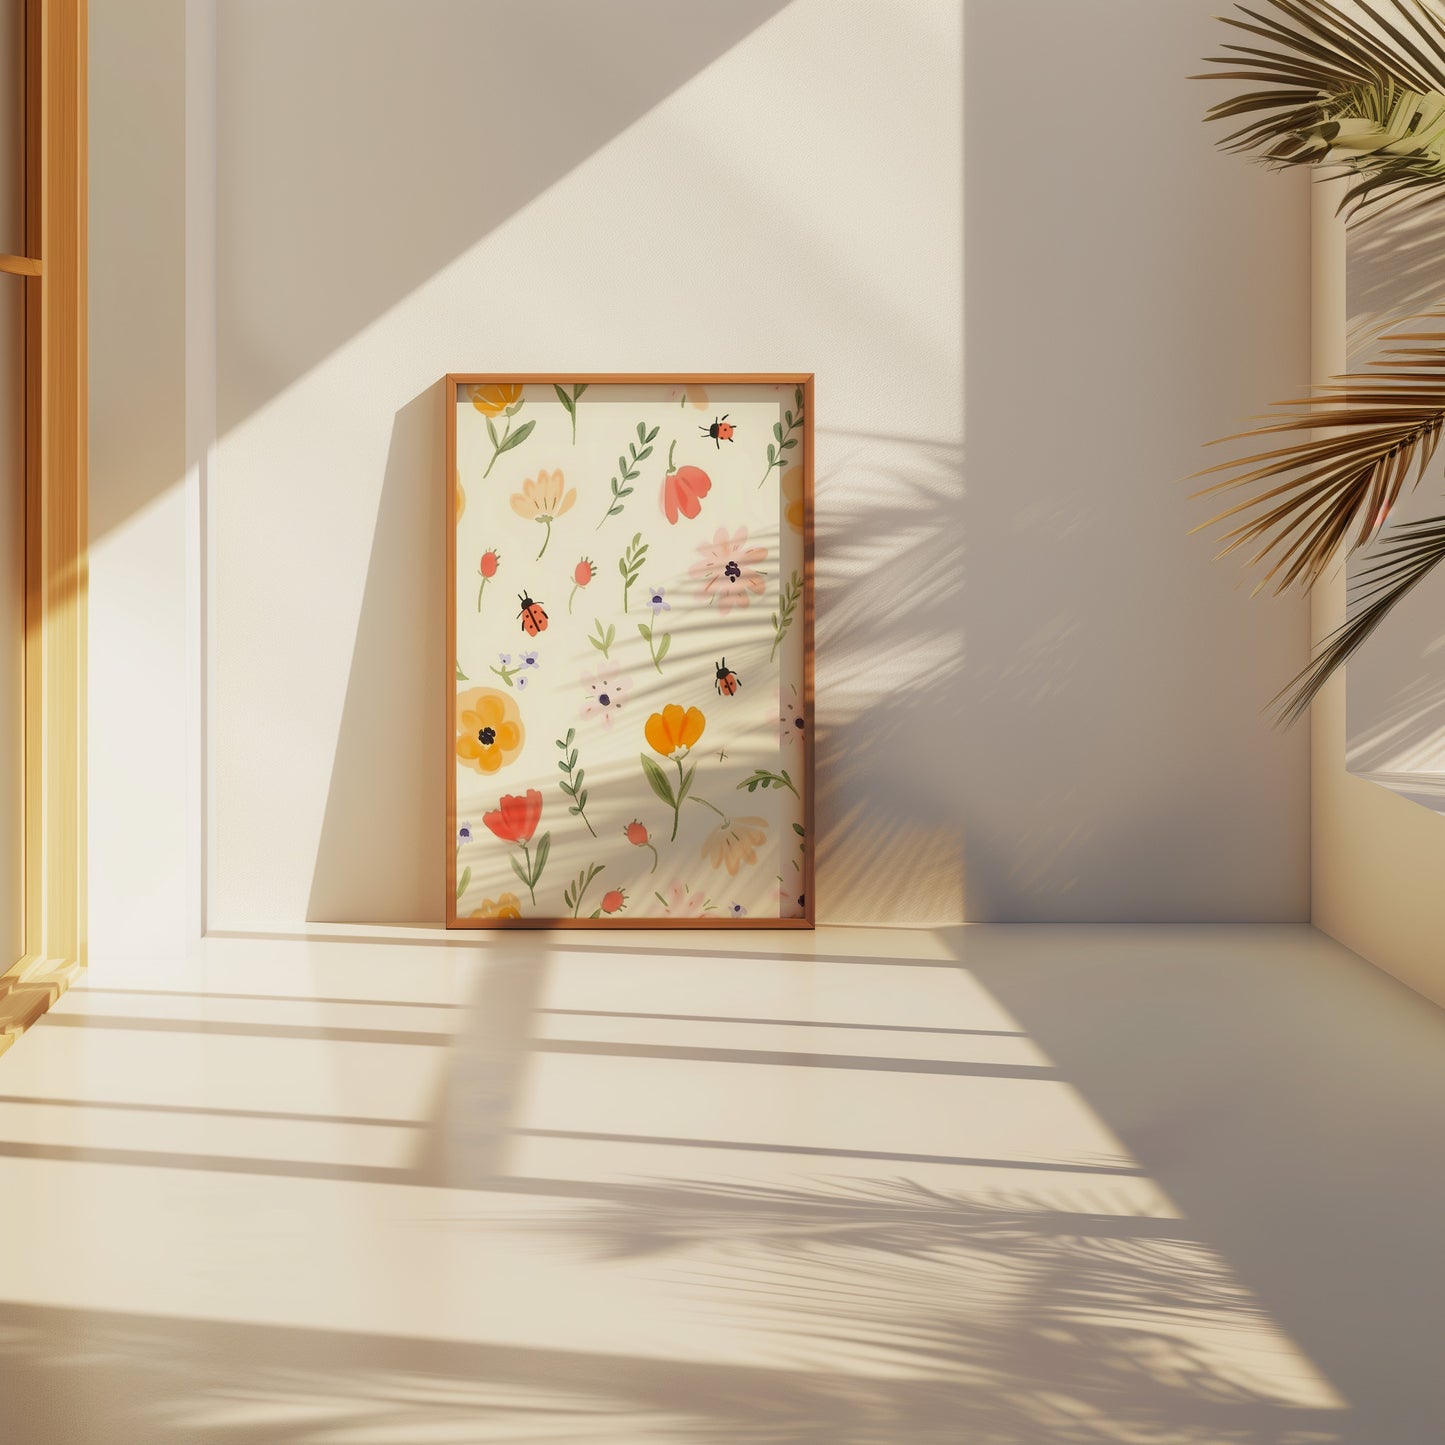 A floral painting leaning against a wall with sunlight casting shadows in the room.